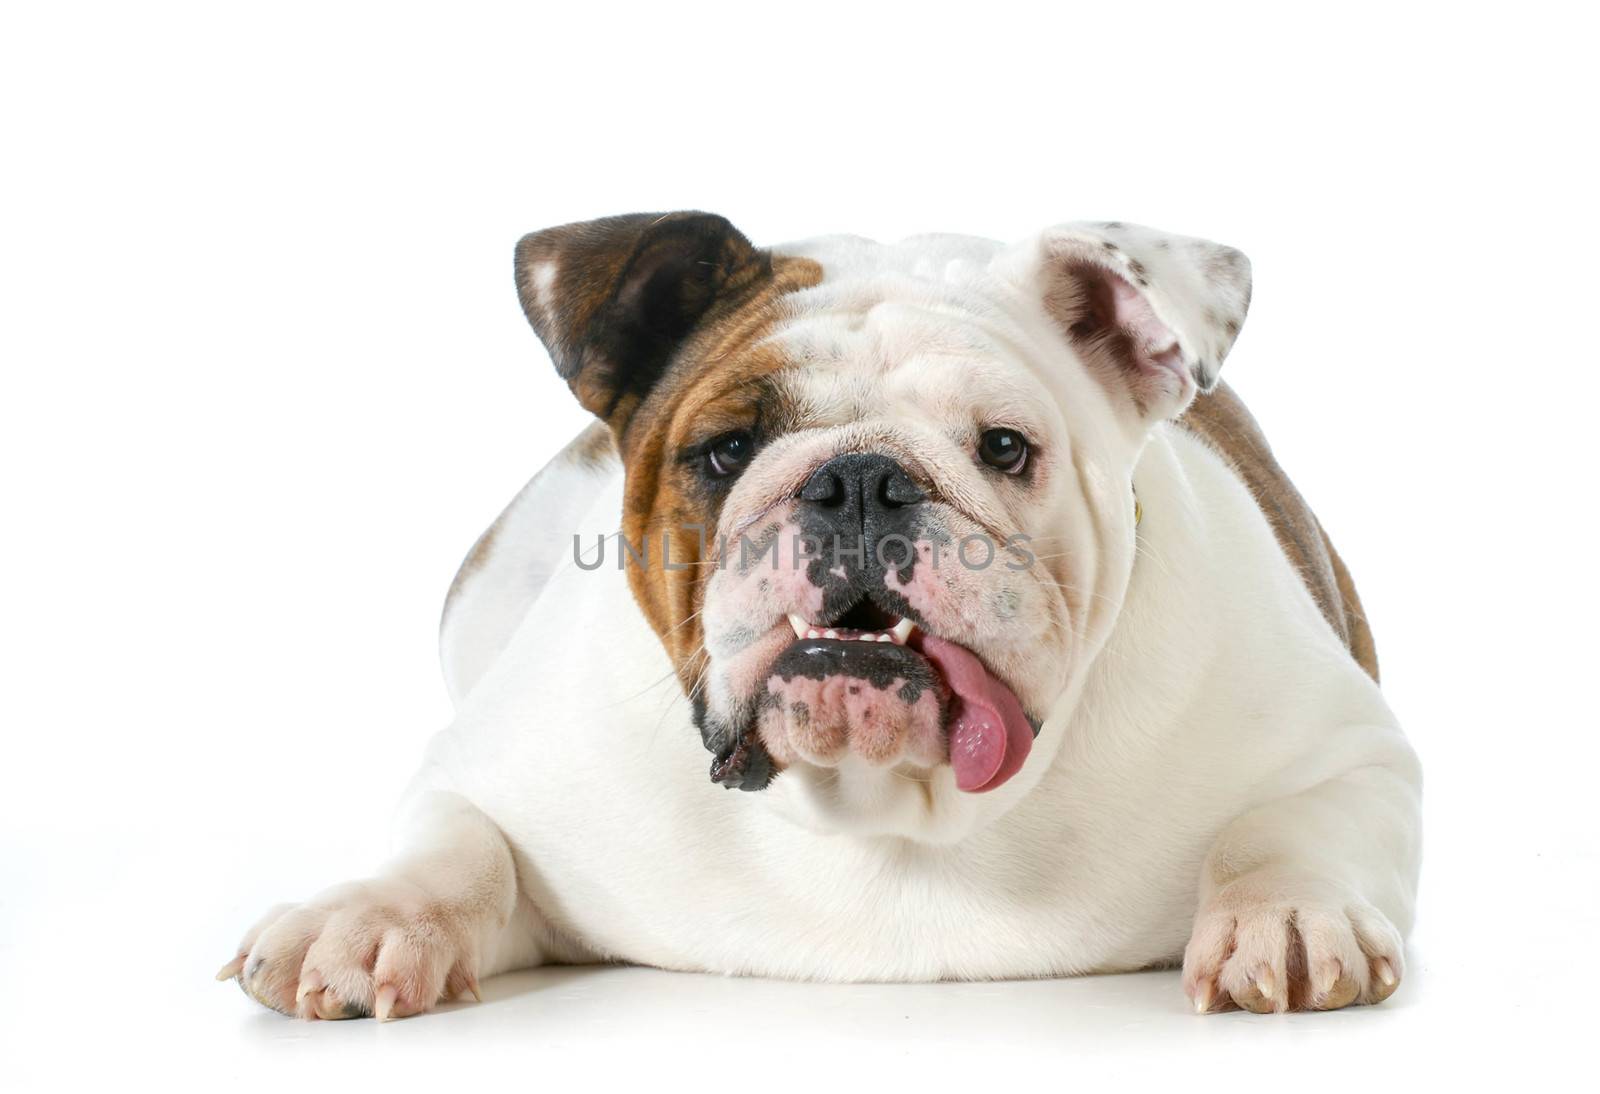 english bulldog with silly expression looking at viewer isolated on white background